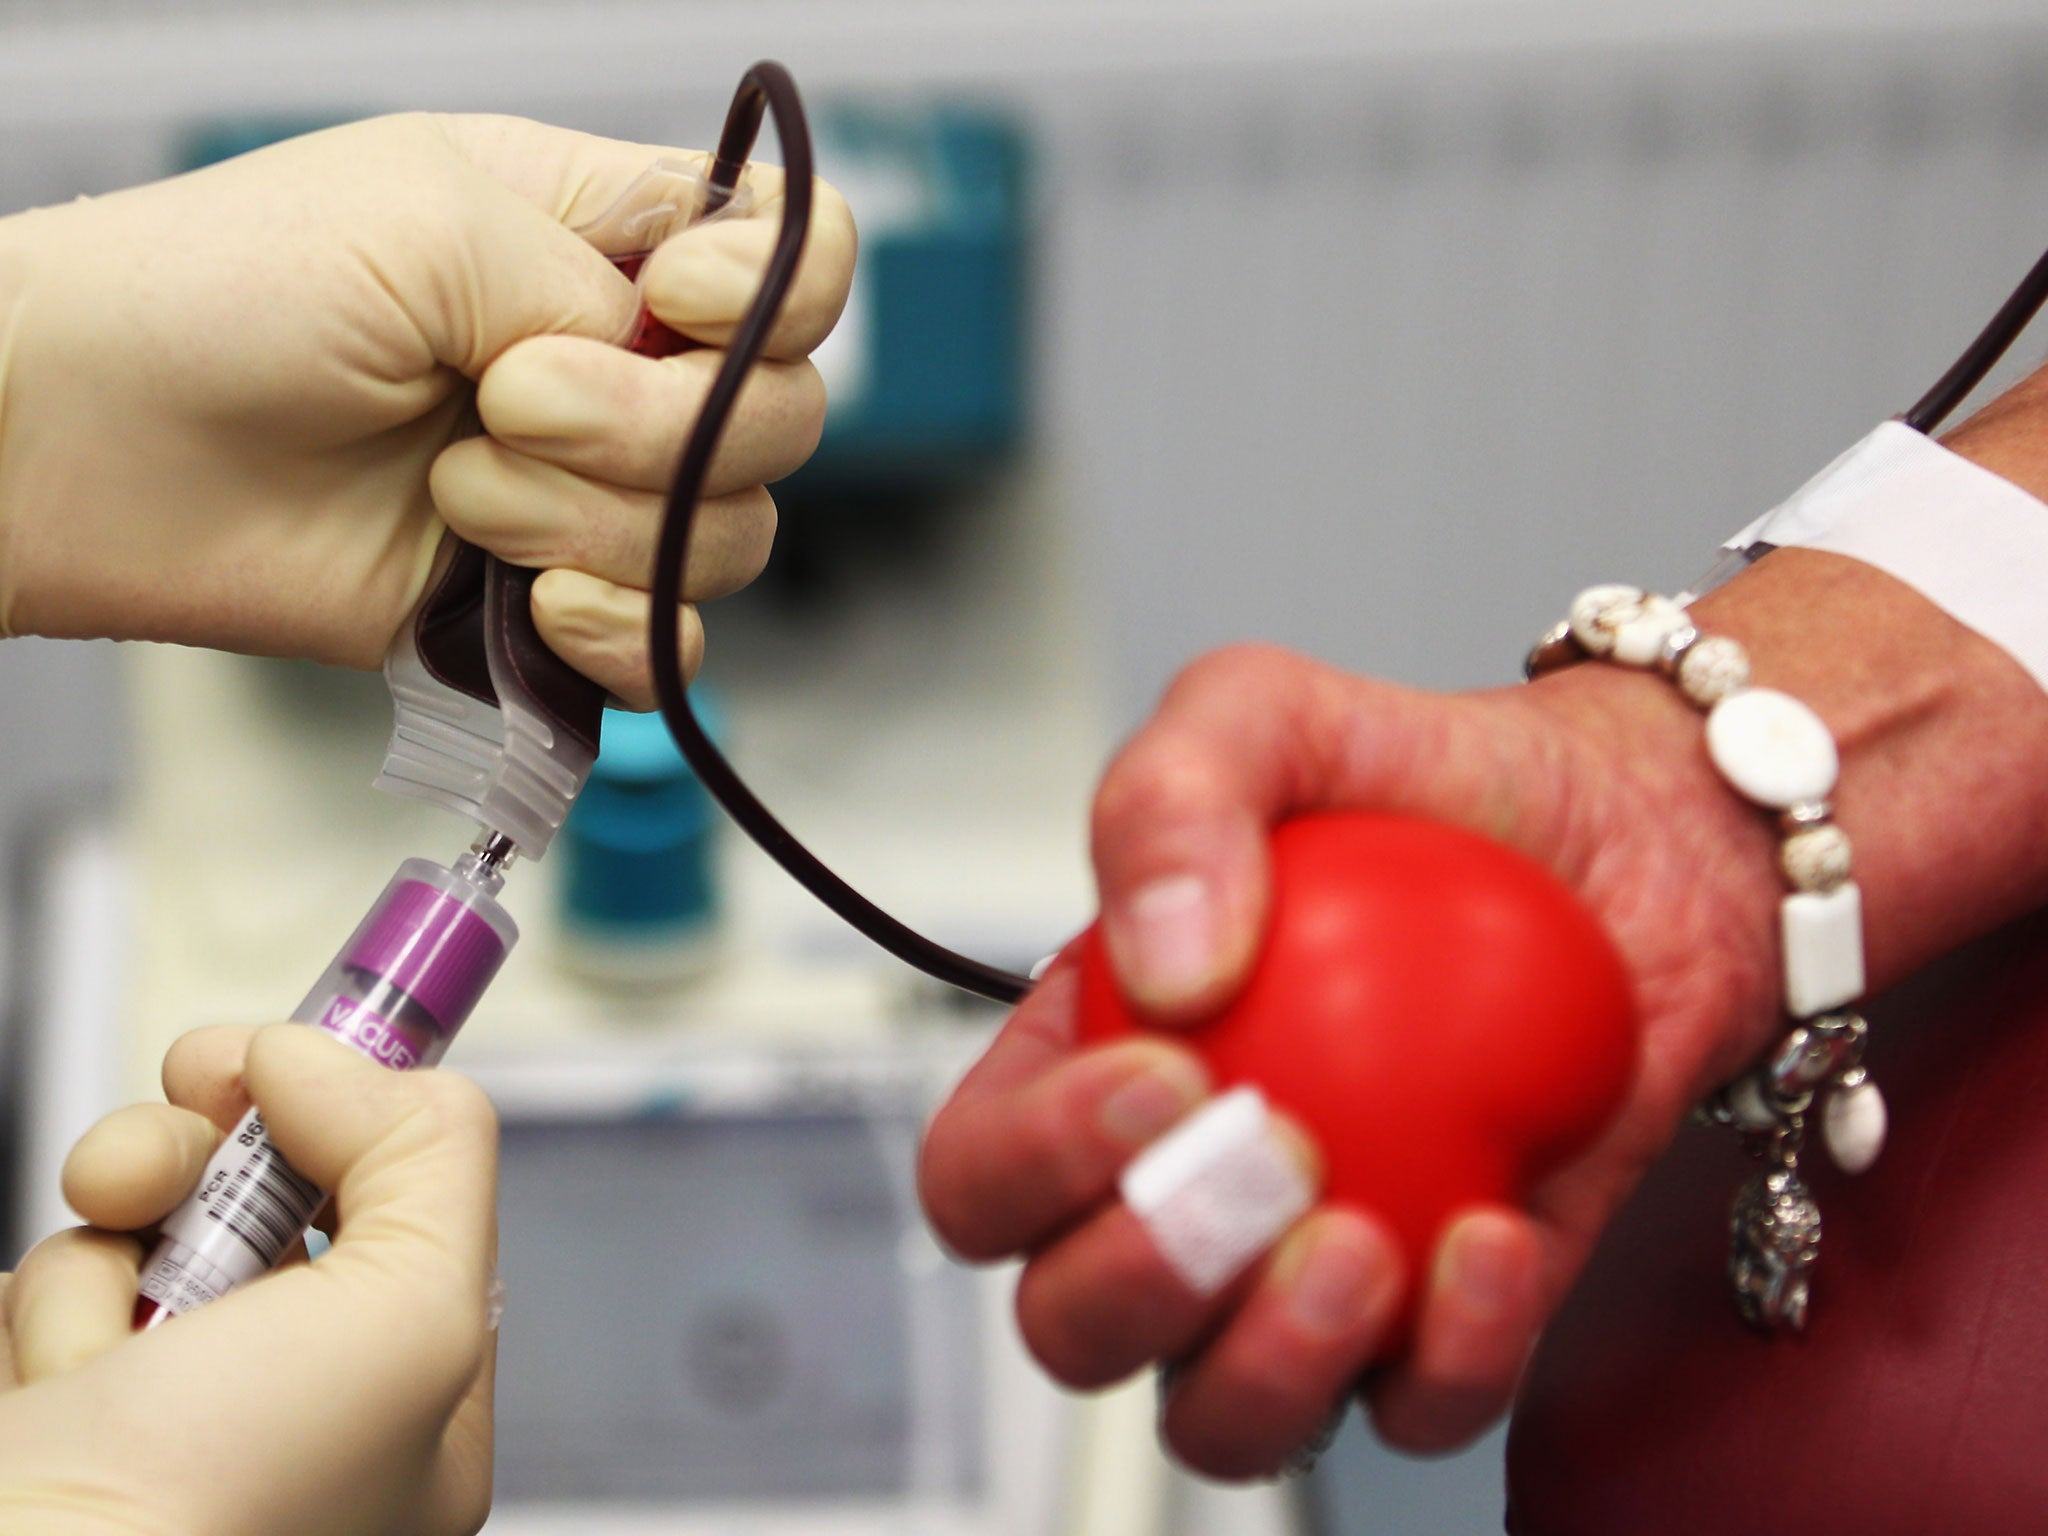 More than a thousand Polish expatriates are to donate blood in a bid for solidarity with Britons, in a positive protest taking place as an alternative to an unofficial strike